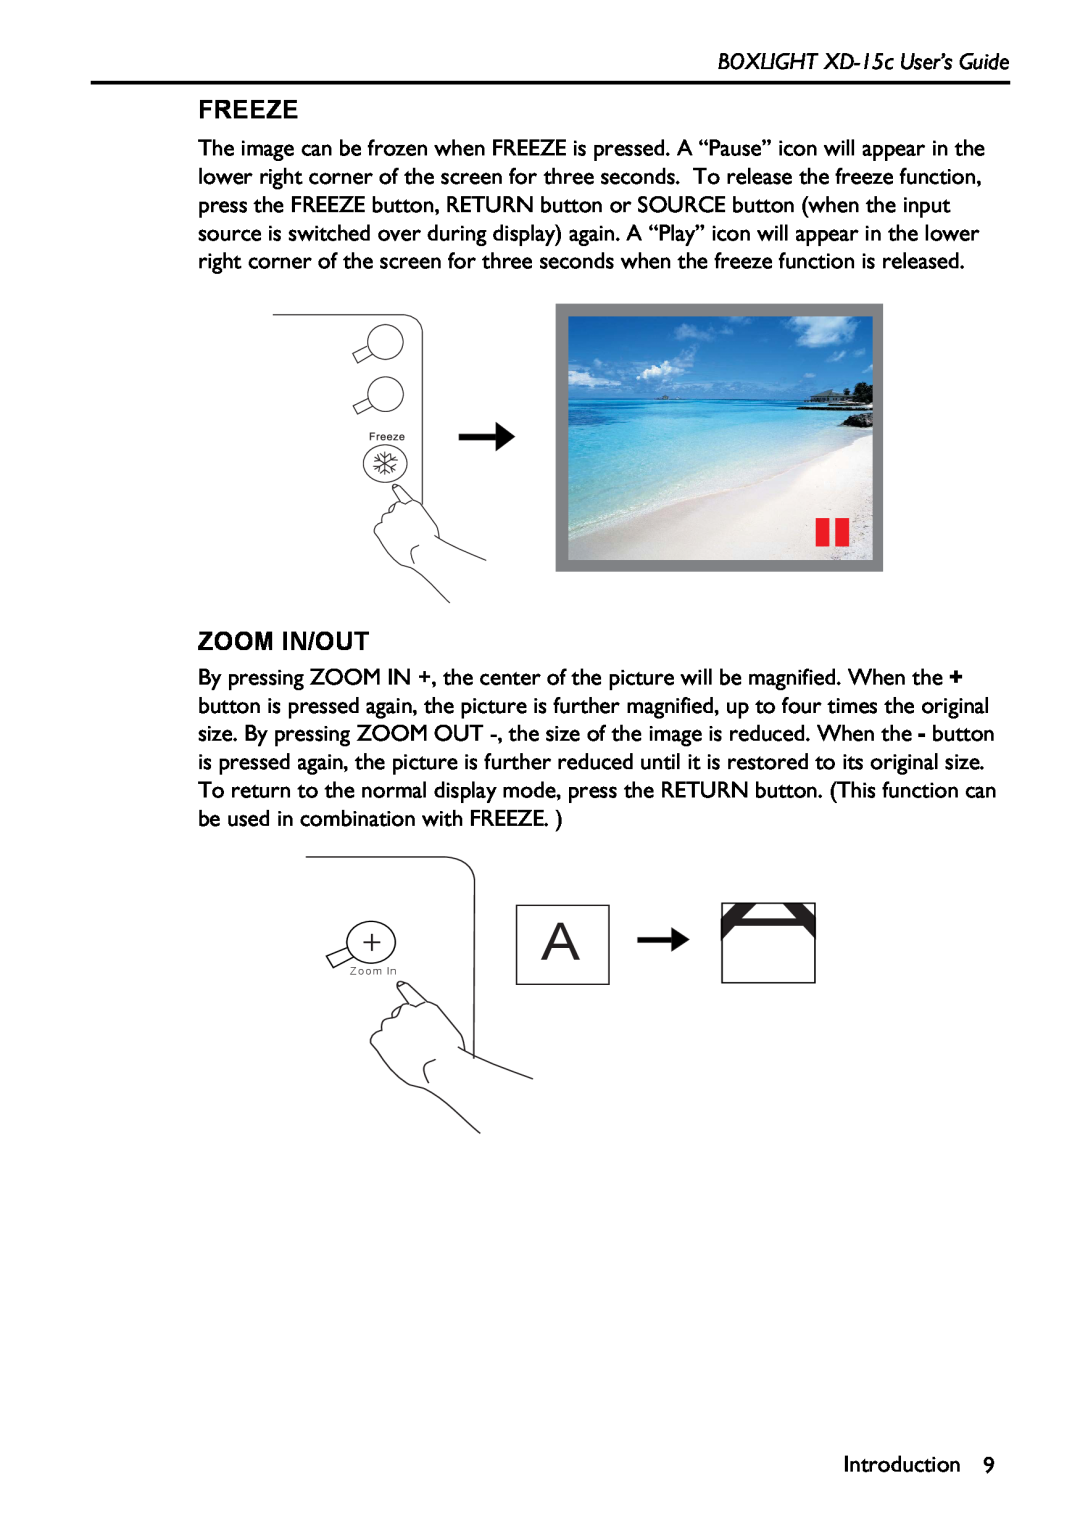 BOXLIGHT manual Freeze, Zoom In/Out, BOXLIGHT XD-15c User’s Guide 